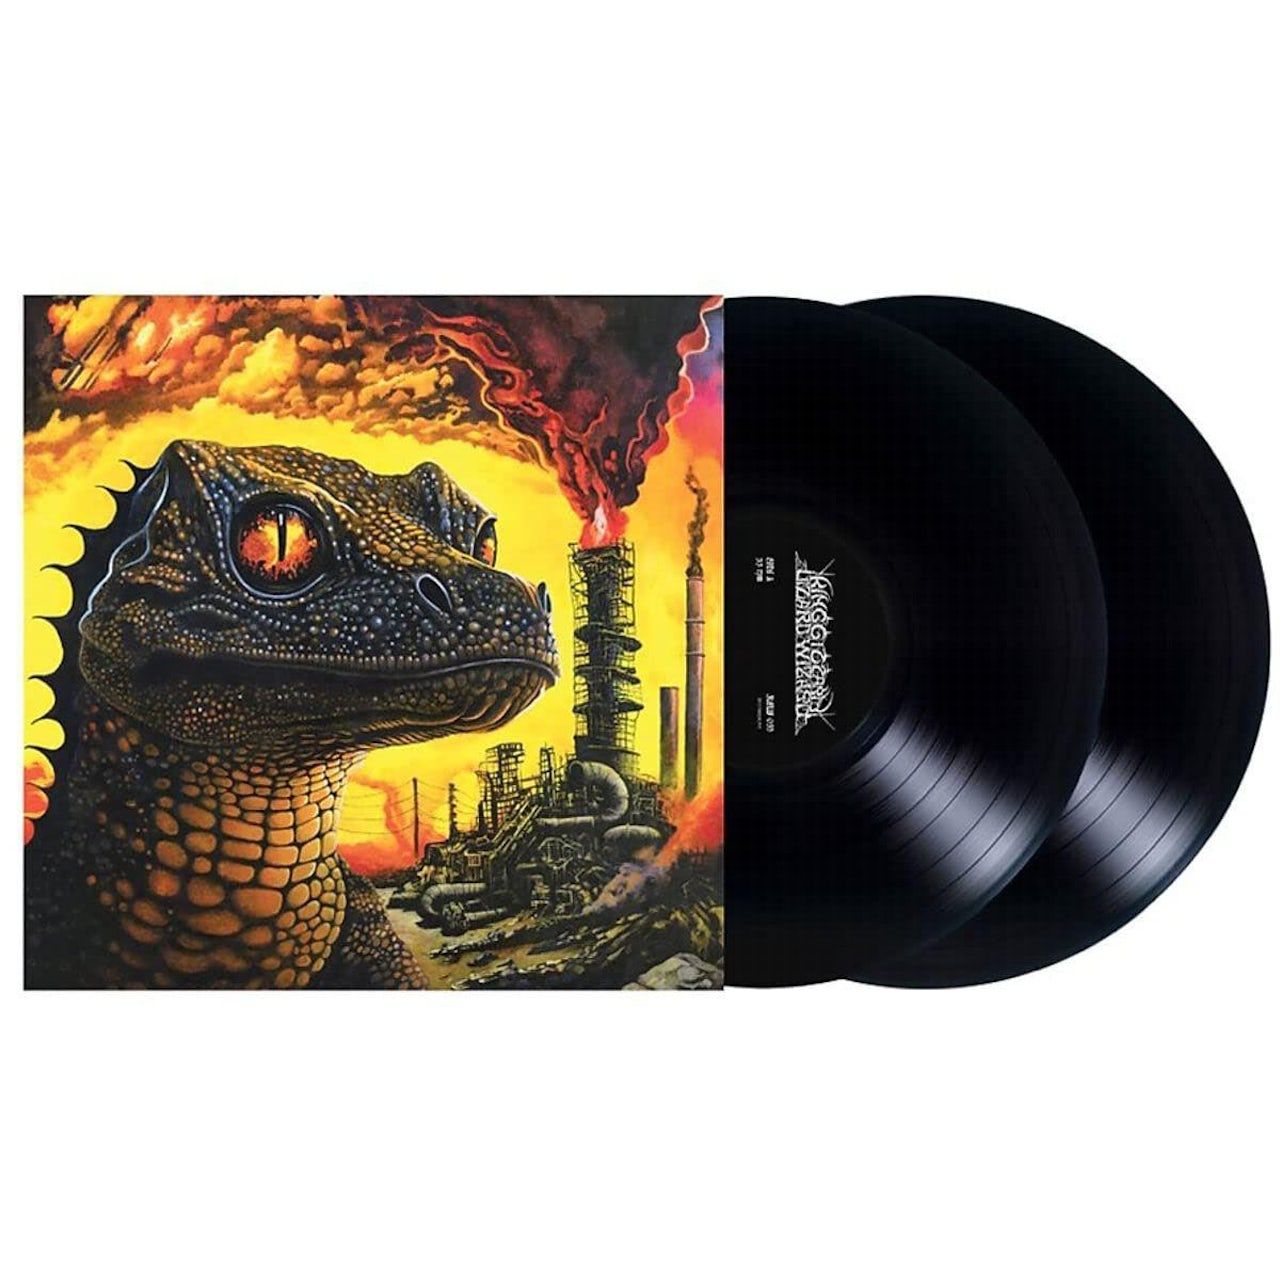 0842812189524, Виниловая пластинка King Gizzard & The Lizard Wizard, Petrodragonic Apocalypse; Or, Dawn Of Eternal Night: An Annihilation Of Planet Earth And The Beginning Of Merciless Damnation (coloured)